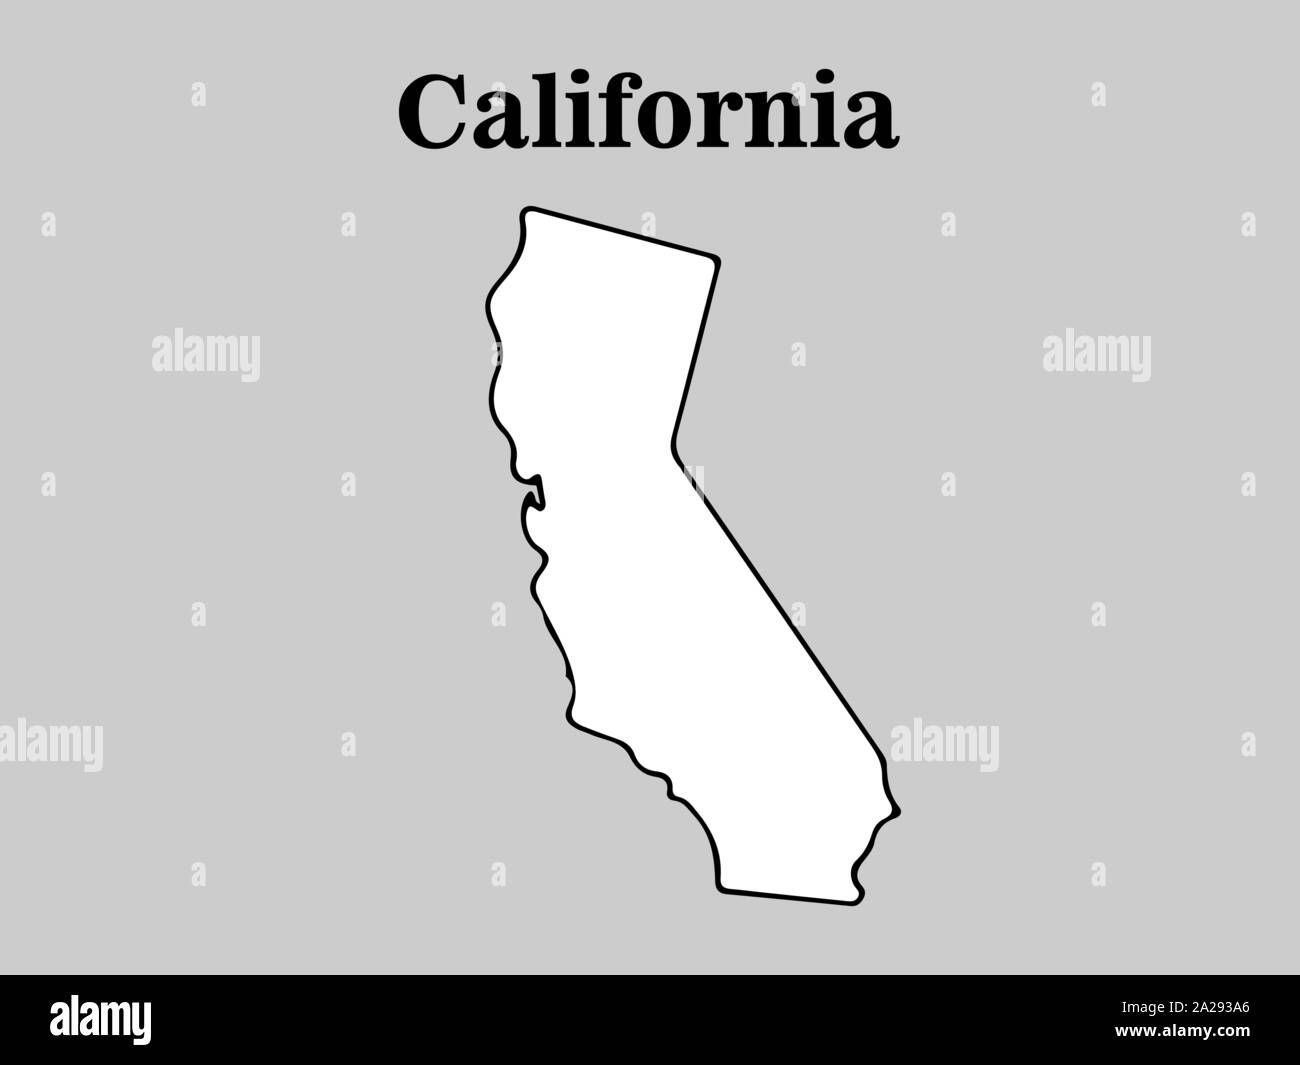 u-s-state-of-california-map-vector-illustration-eps-10-stock-vector